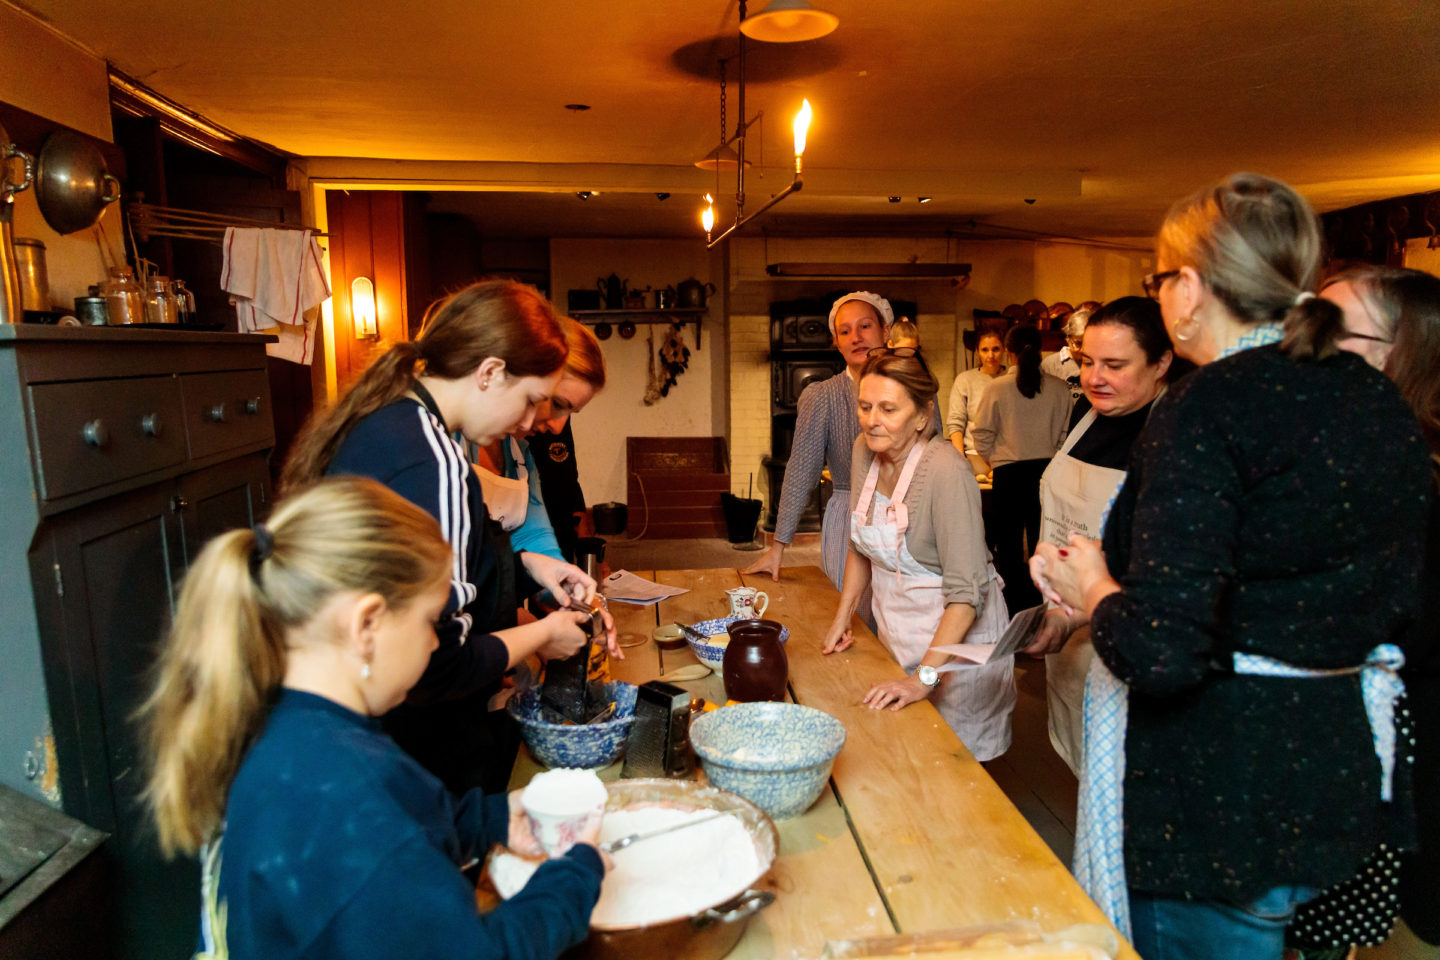 Bake, Find, Feast! A Family Friendly Historic Cooking Workshop